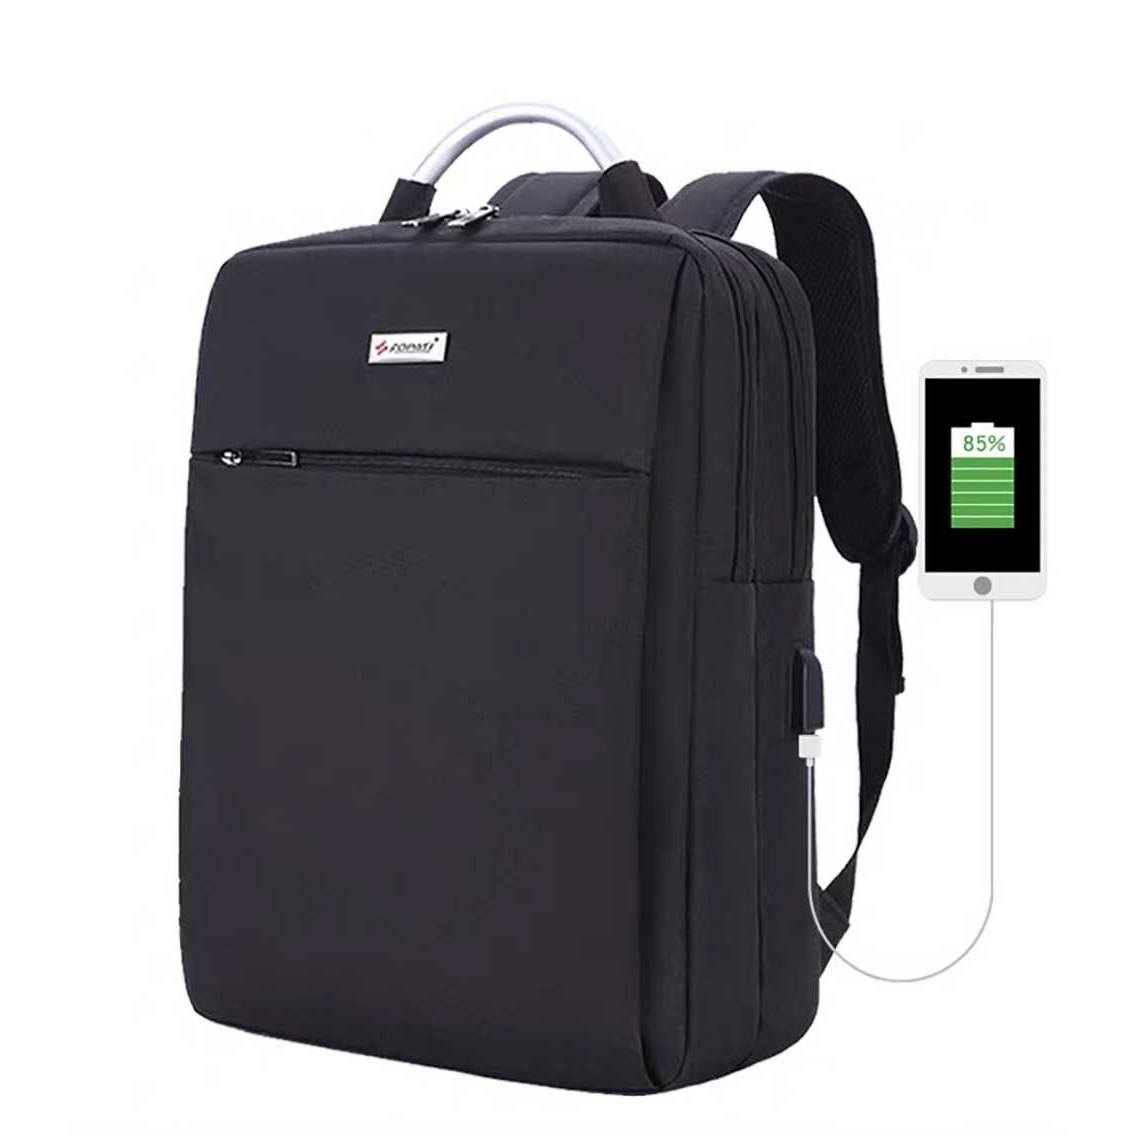 14'' to 15.6''inch laptop backpack